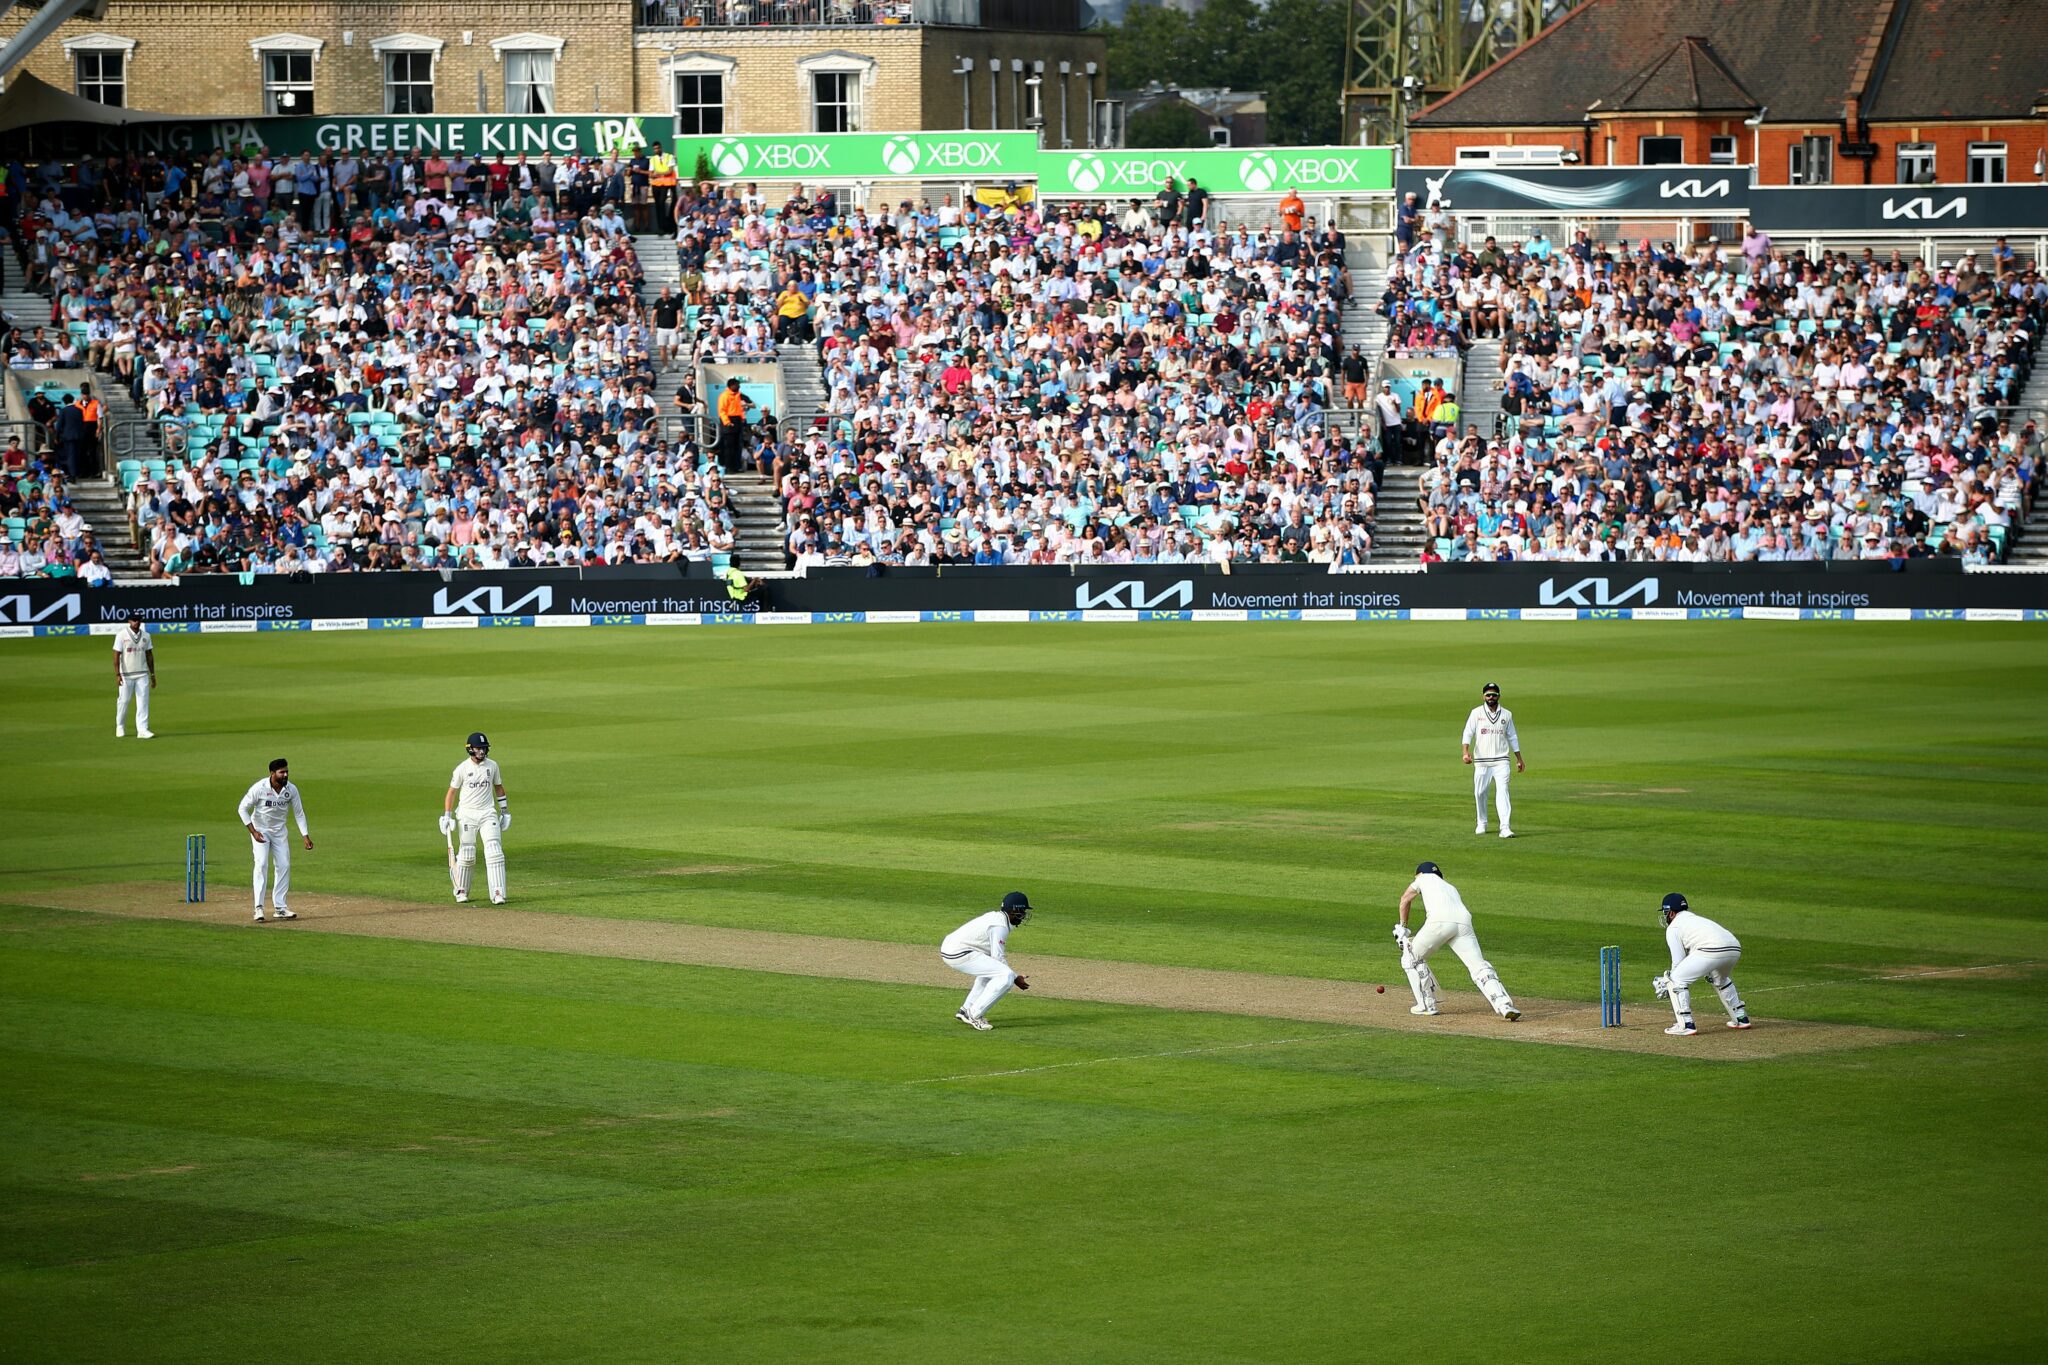 Image of cricket players on the cricket pitch during a game